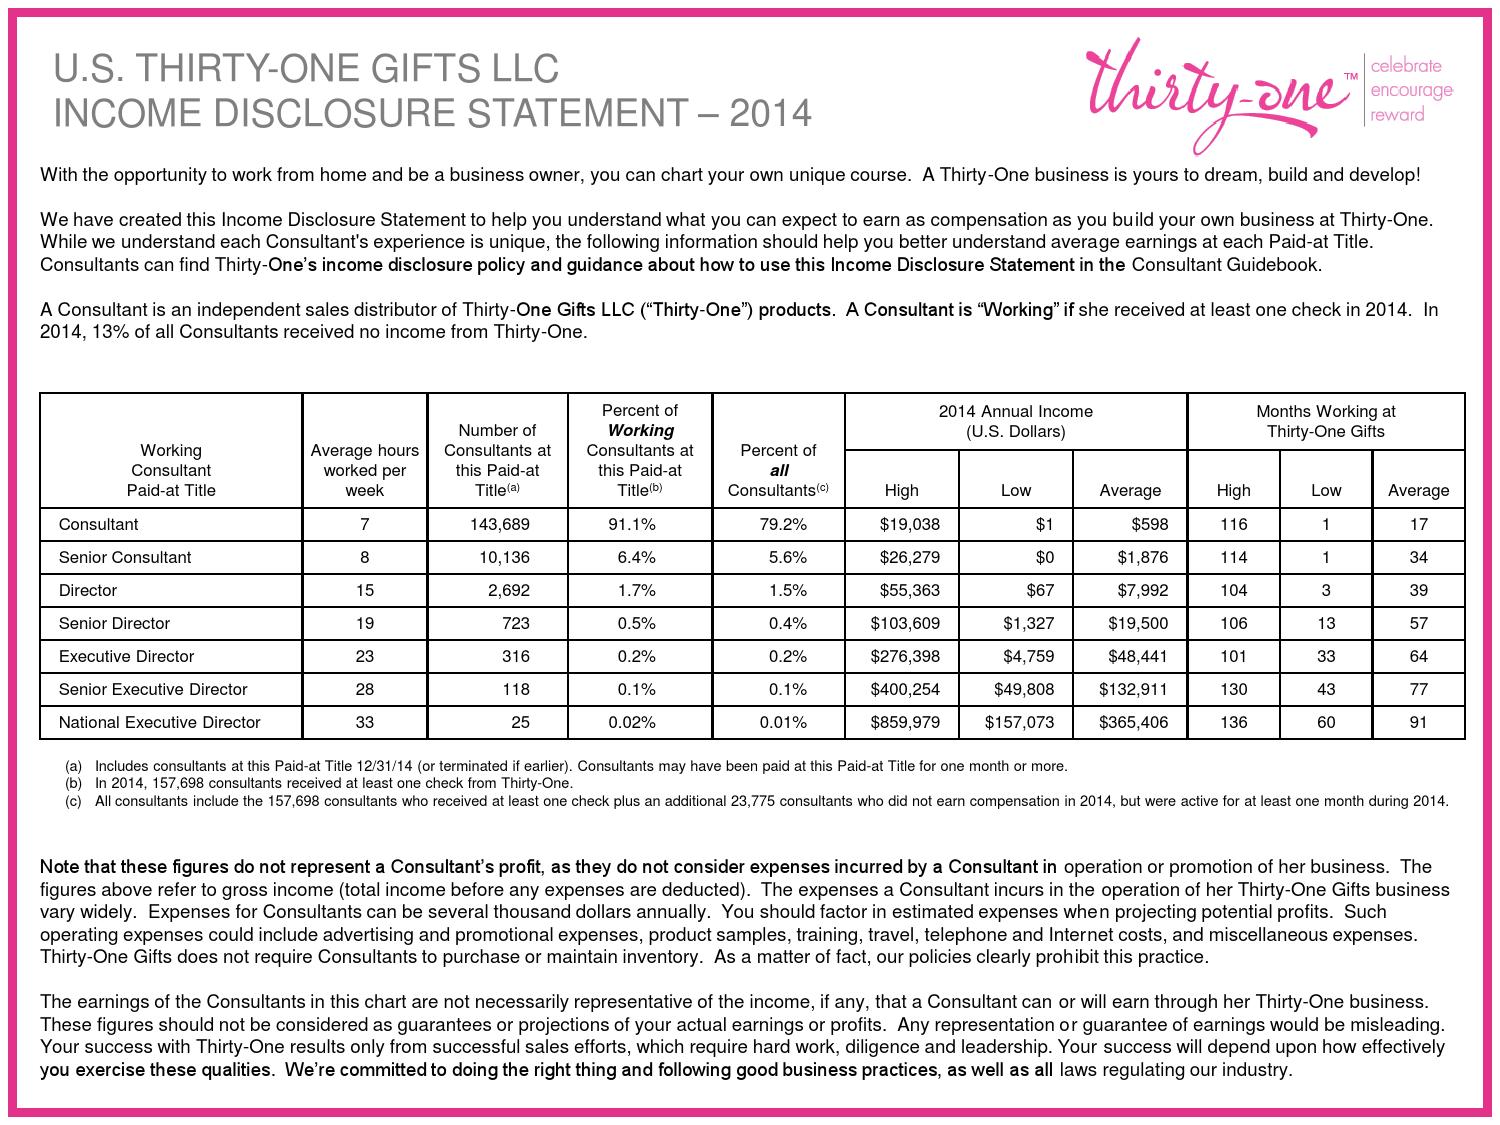 Thirty-One Gifts Income Claims Database - Truth in Advertising